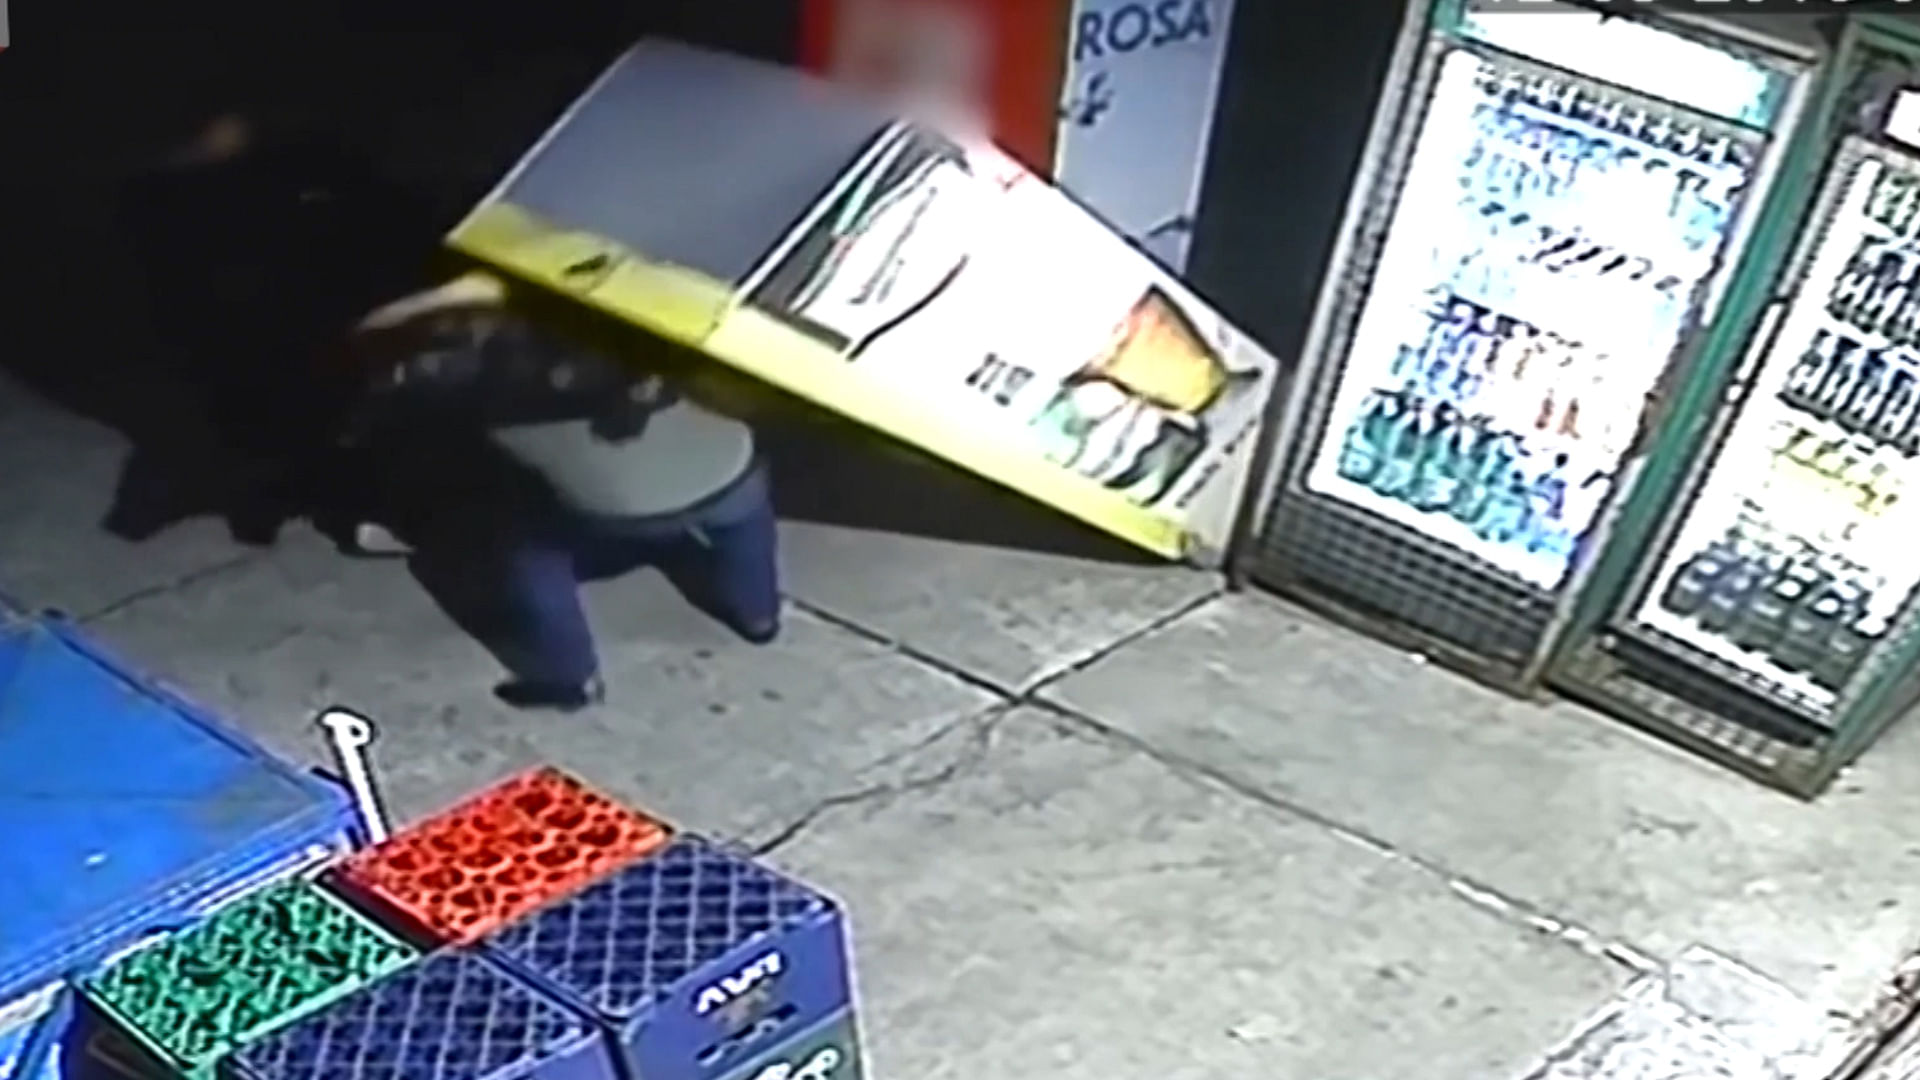 The fridge toppled down on the thief as he tried to steal beer. (Photo: AP/Jukin Media Screengrab)